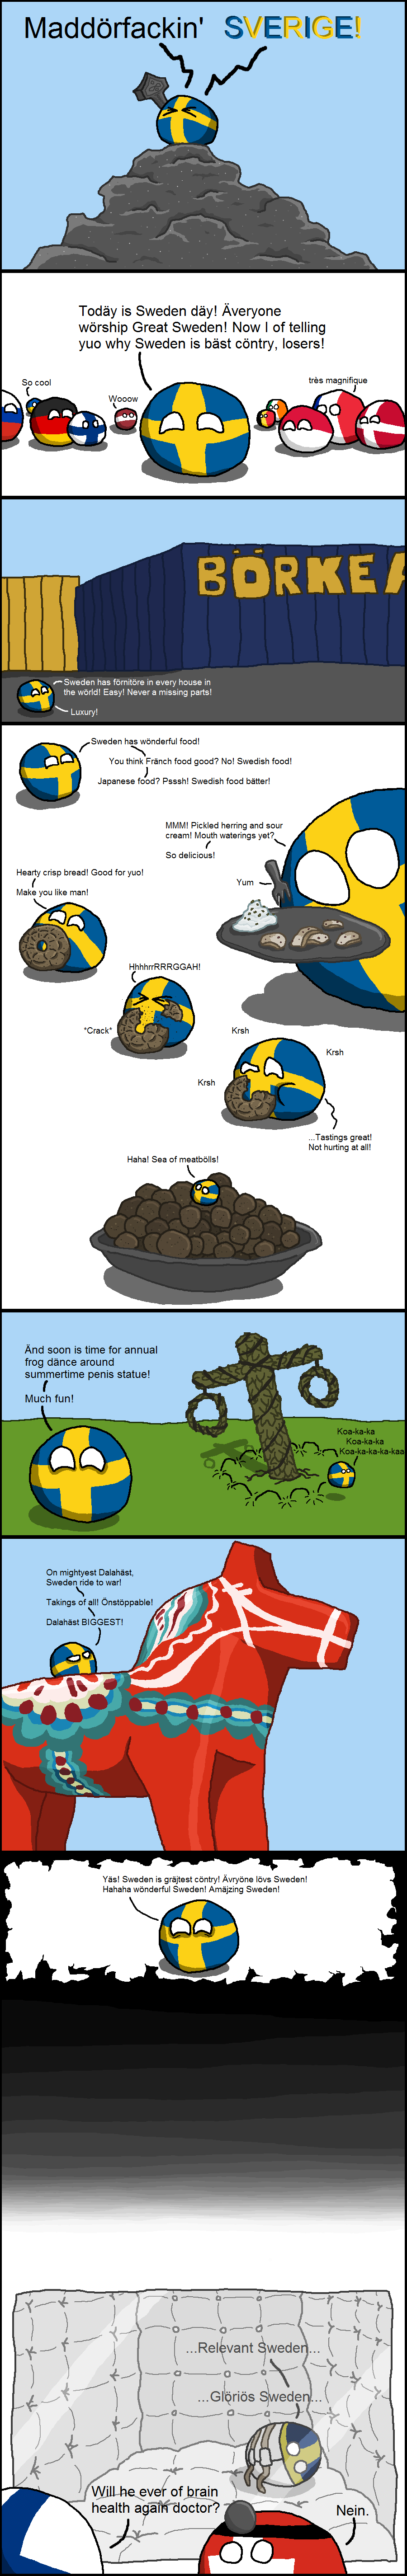 country-balls-sweden-is-best-day.png